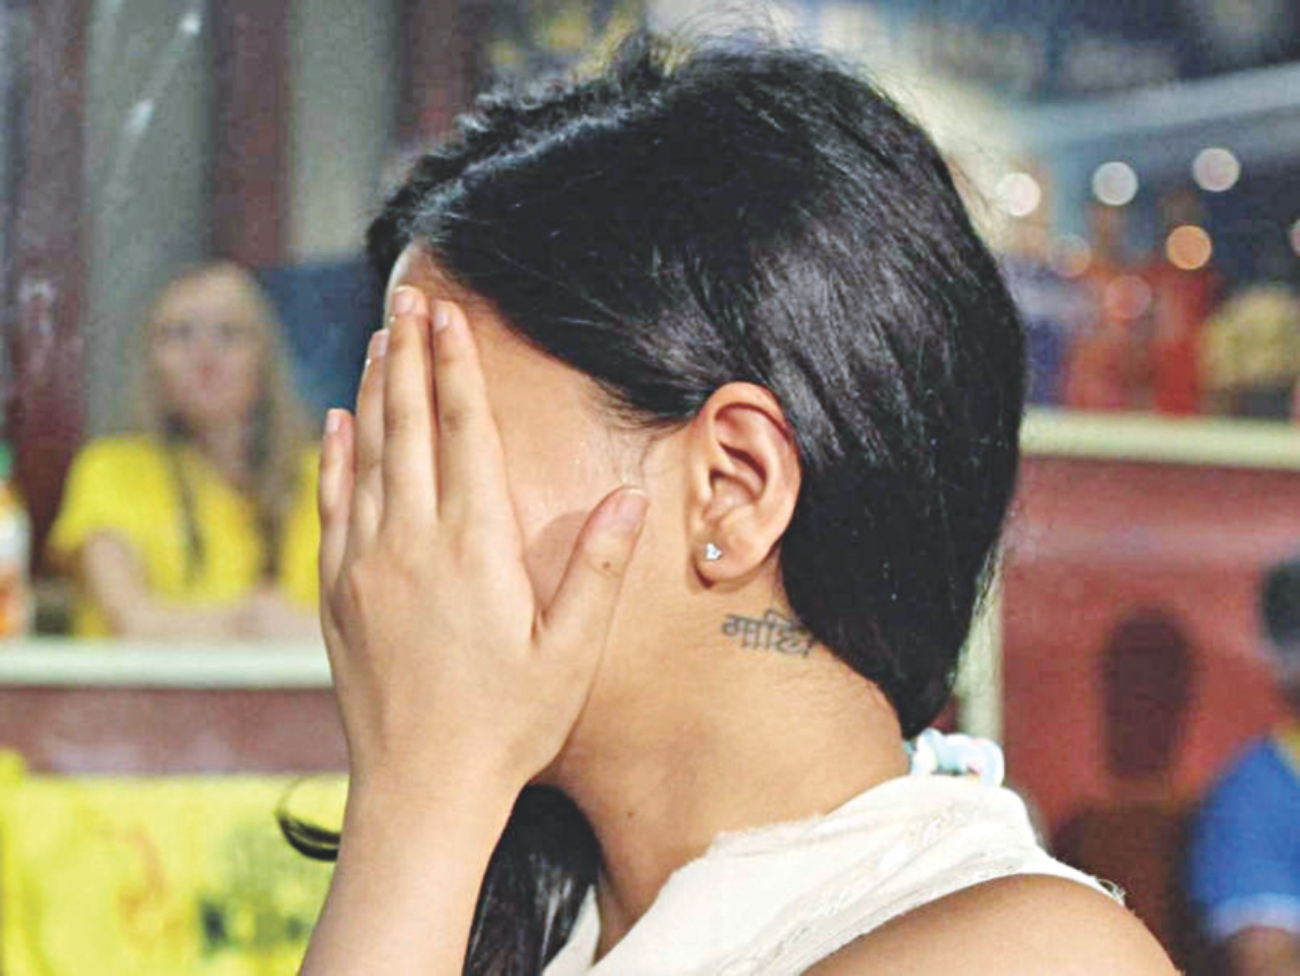 Sakshi Dhoni is showing 'Mahi' Tattoo while hiding her Face.